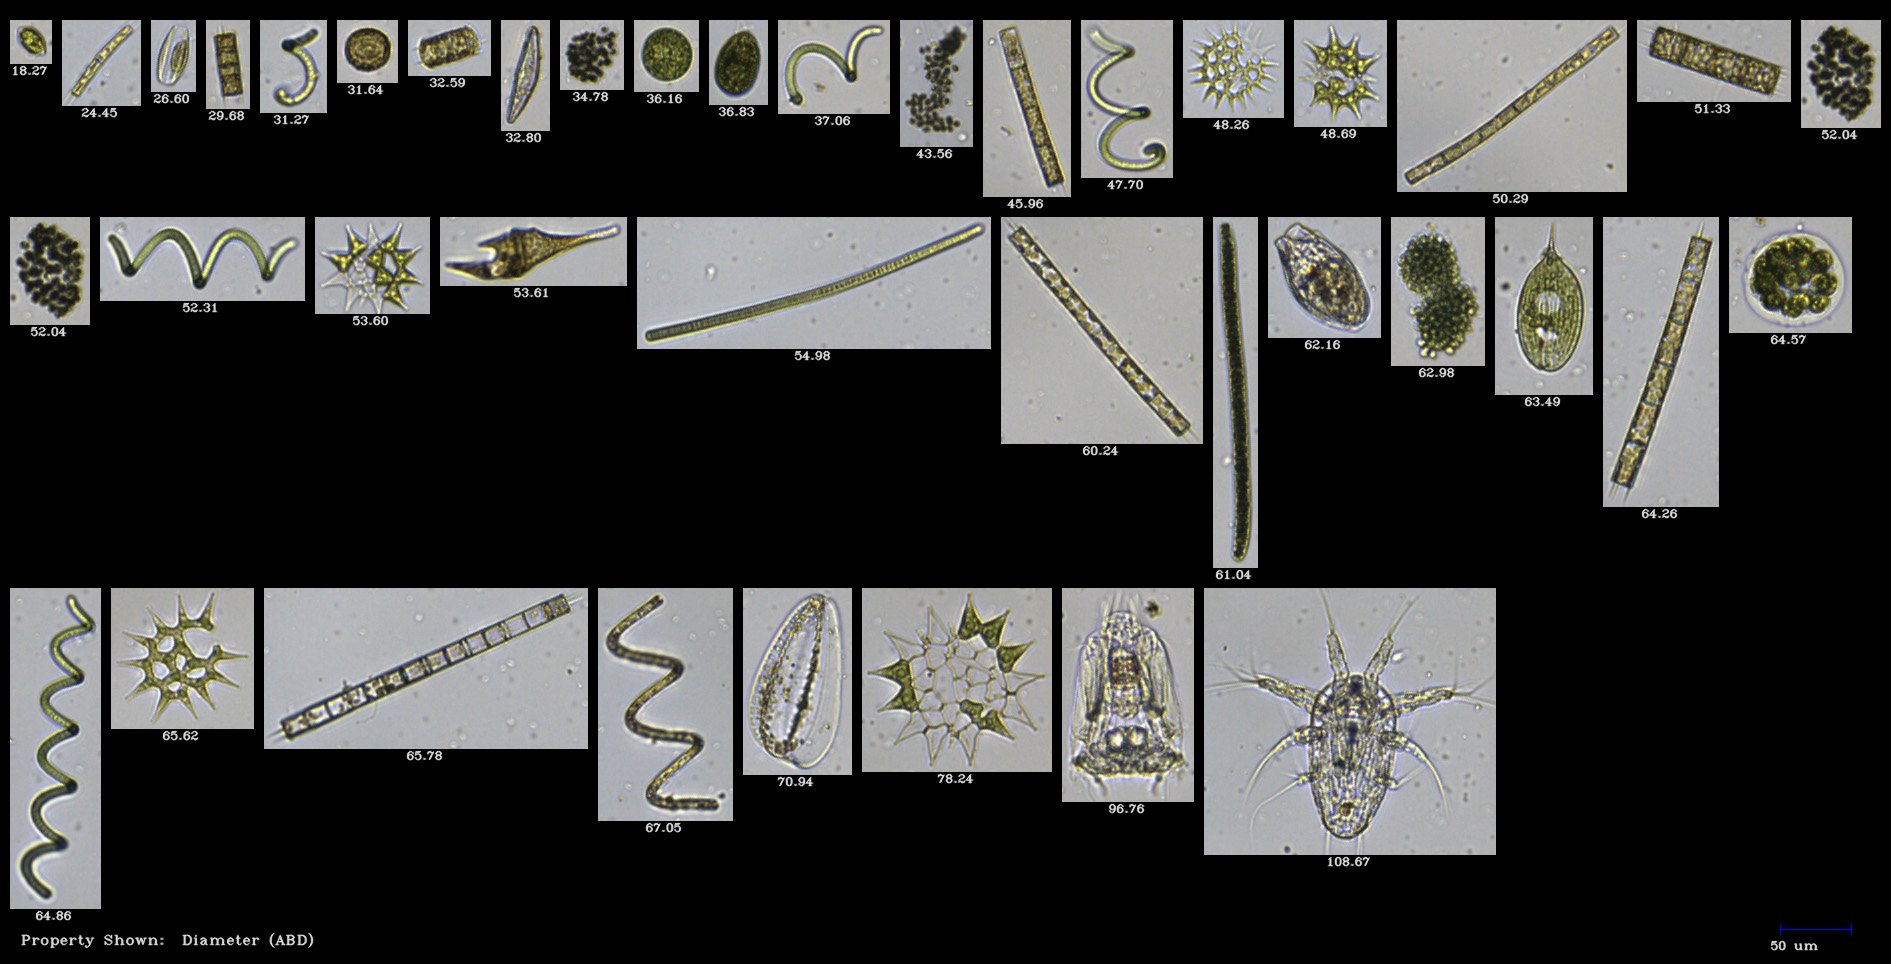 FlowCam freshwater collage of plankton collected in the Yangtze River, China